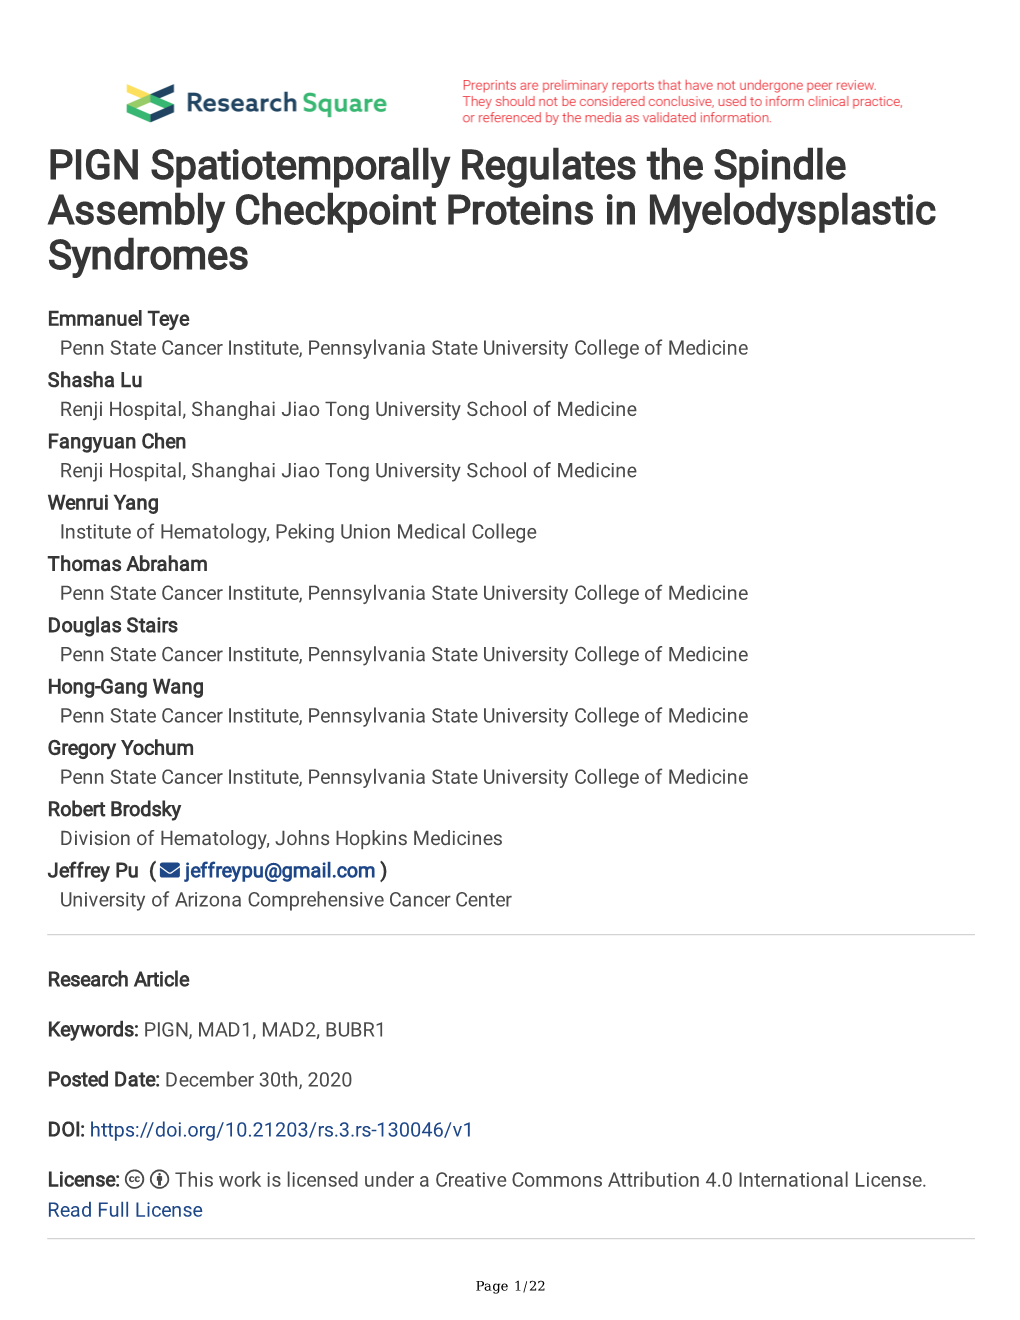 PIGN Spatiotemporally Regulates the Spindle Assembly Checkpoint Proteins in Myelodysplastic Syndromes